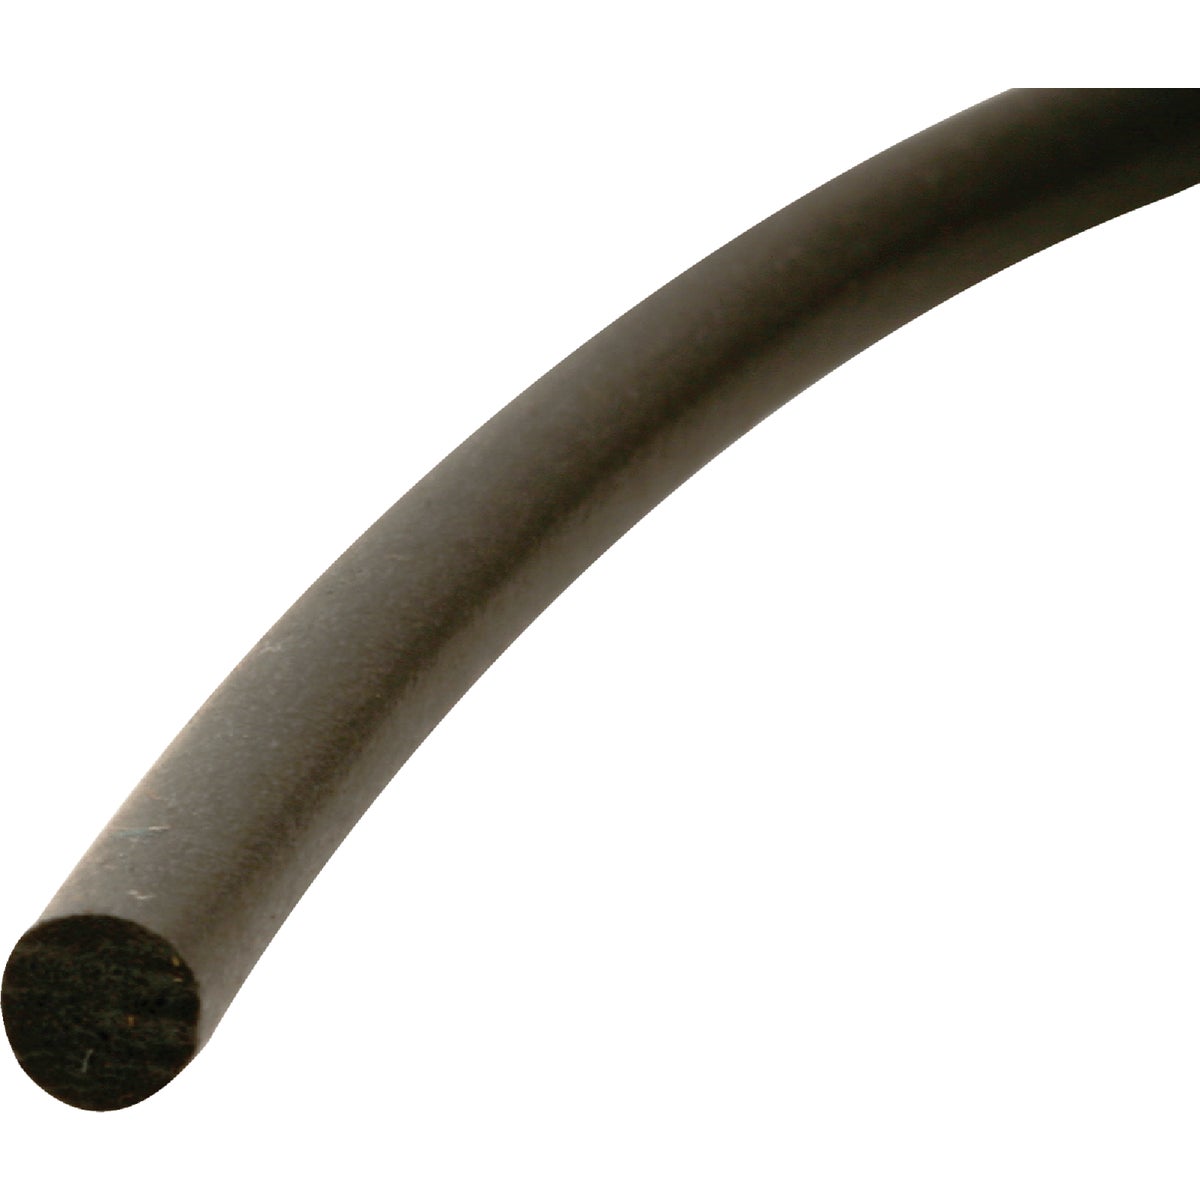 Item 261102, Foam screen spline compresses for a tight fit, is easy-to-install, and 